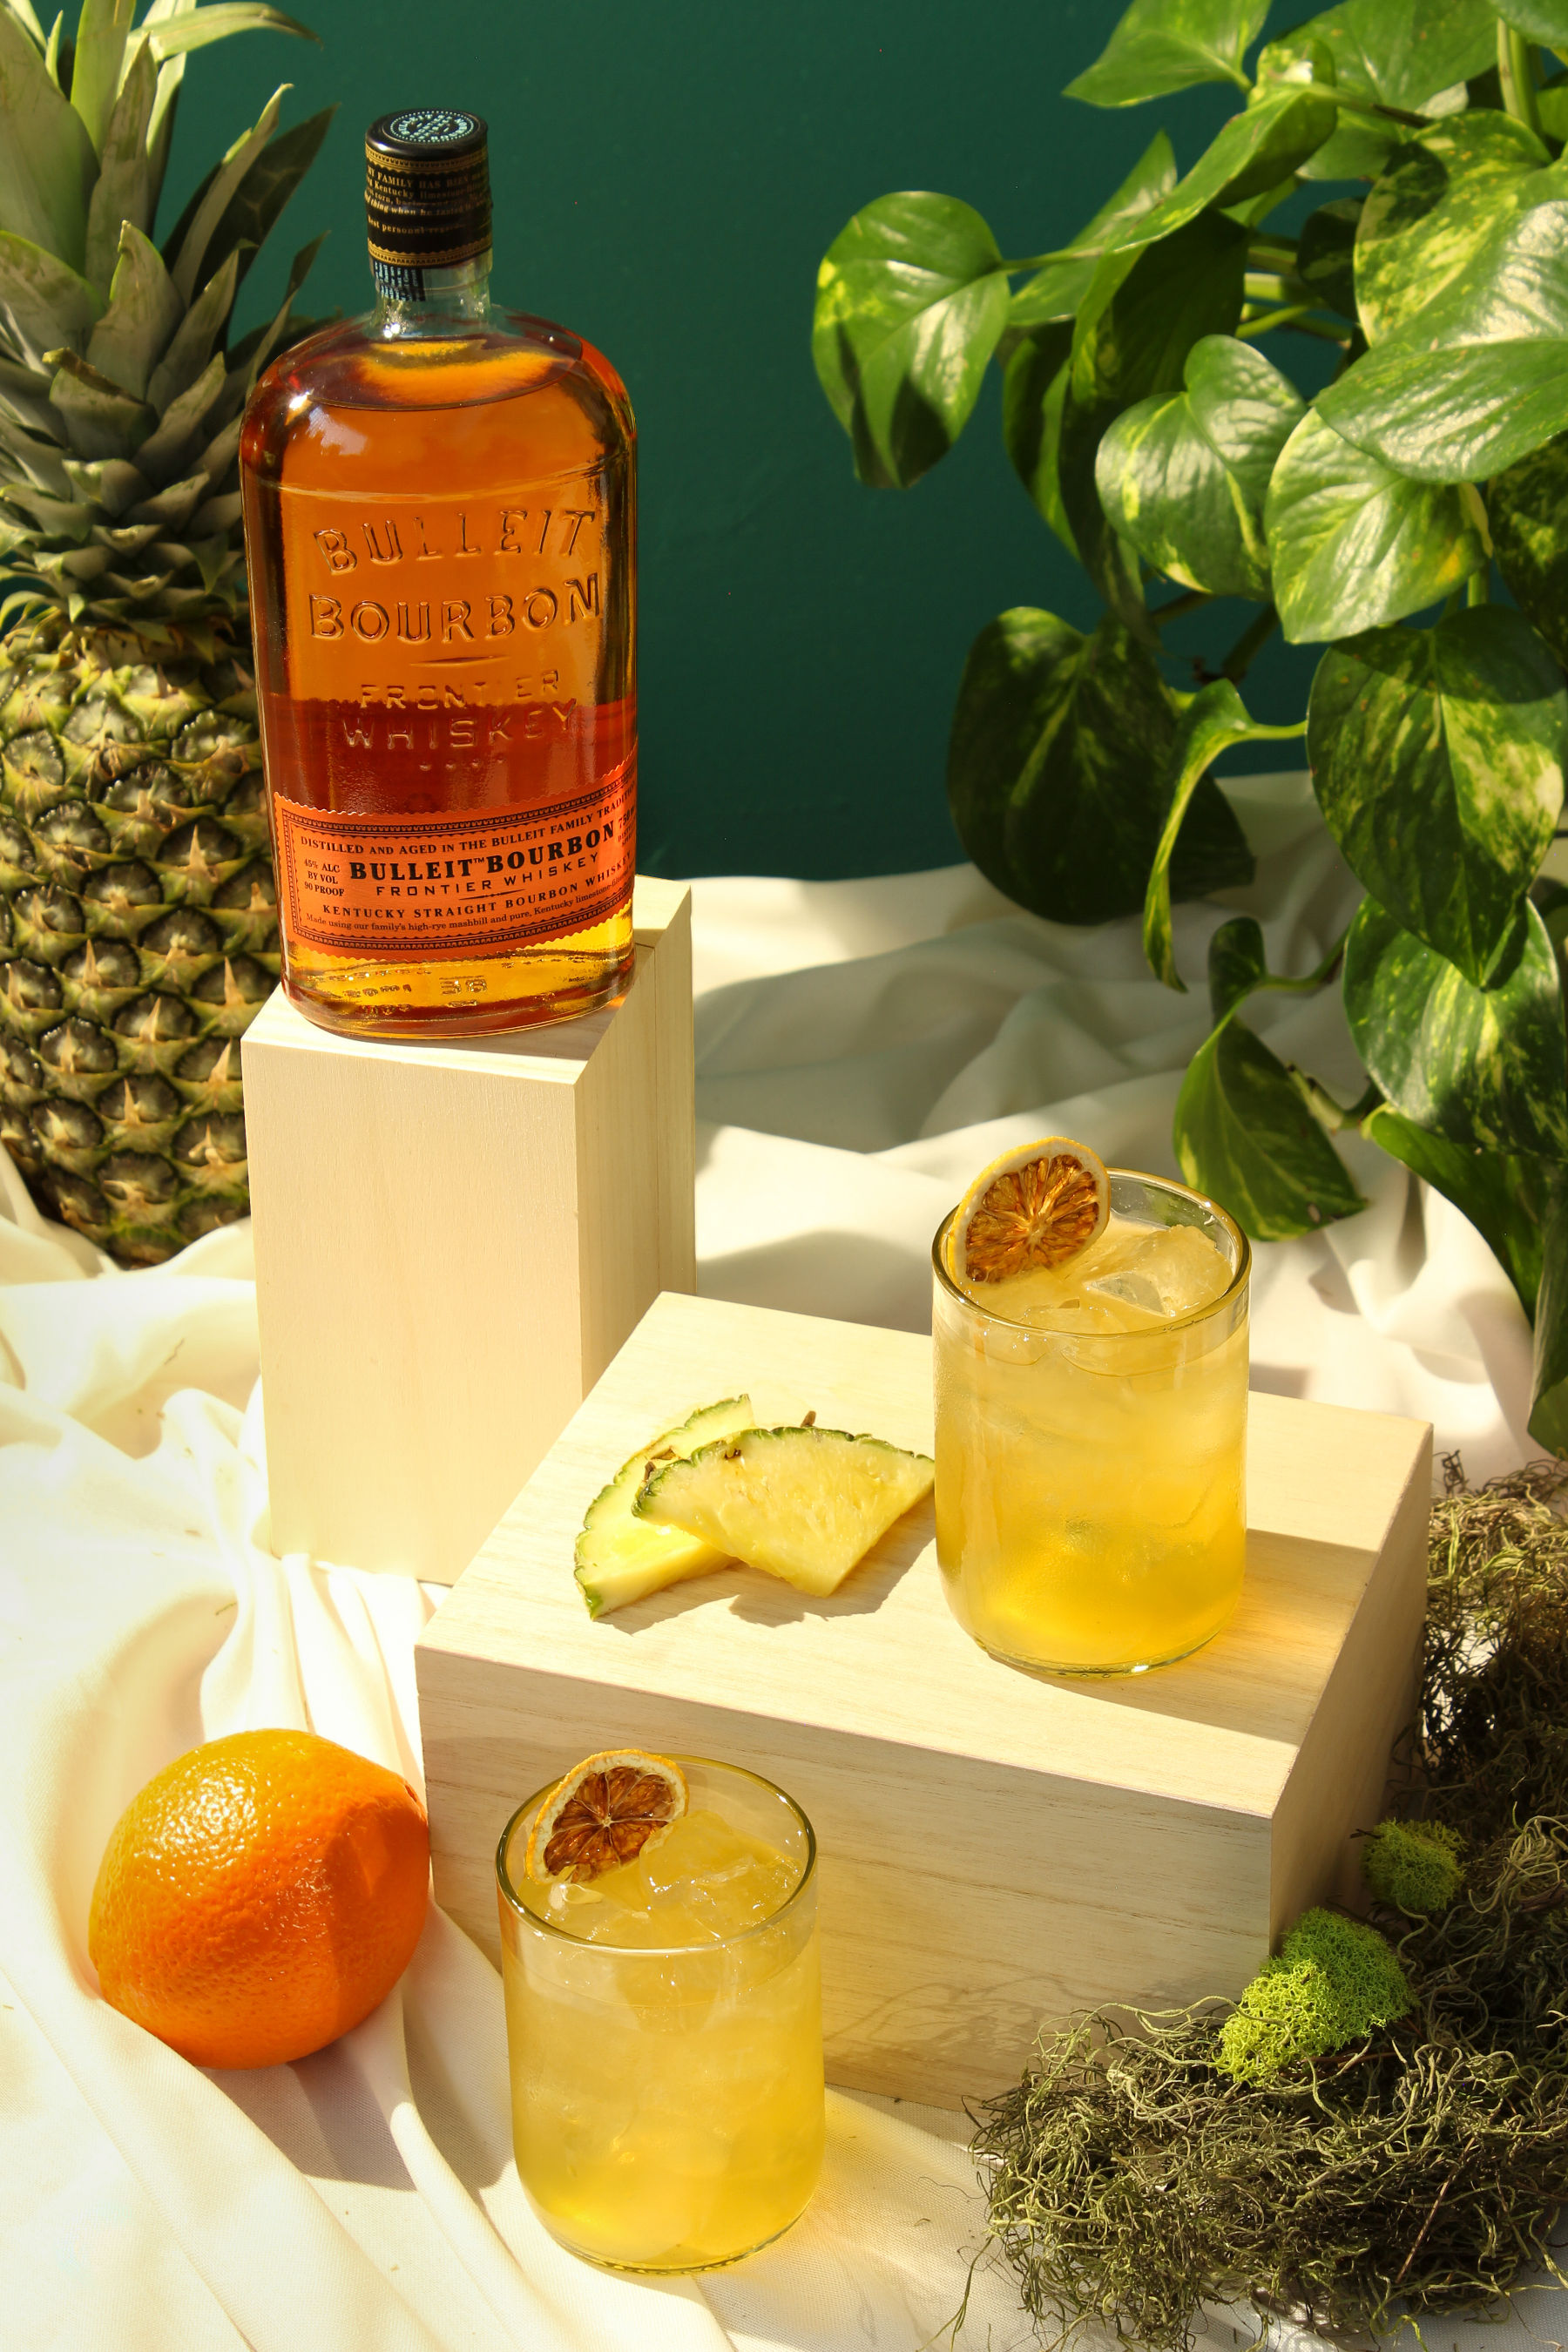 THIS APRIL BULLEIT FRONTIER WHISKEY HAS TEAMED UP WITH AMERICAN FORESTS AND COCKTAIL COURIER TO CREATE A LIMITED-EDITION ECO-FRIENDLY COCKTAIL KIT IN CELEBRATION OF EARTH MONTH AND EARTH DAY ON APRIL 22.